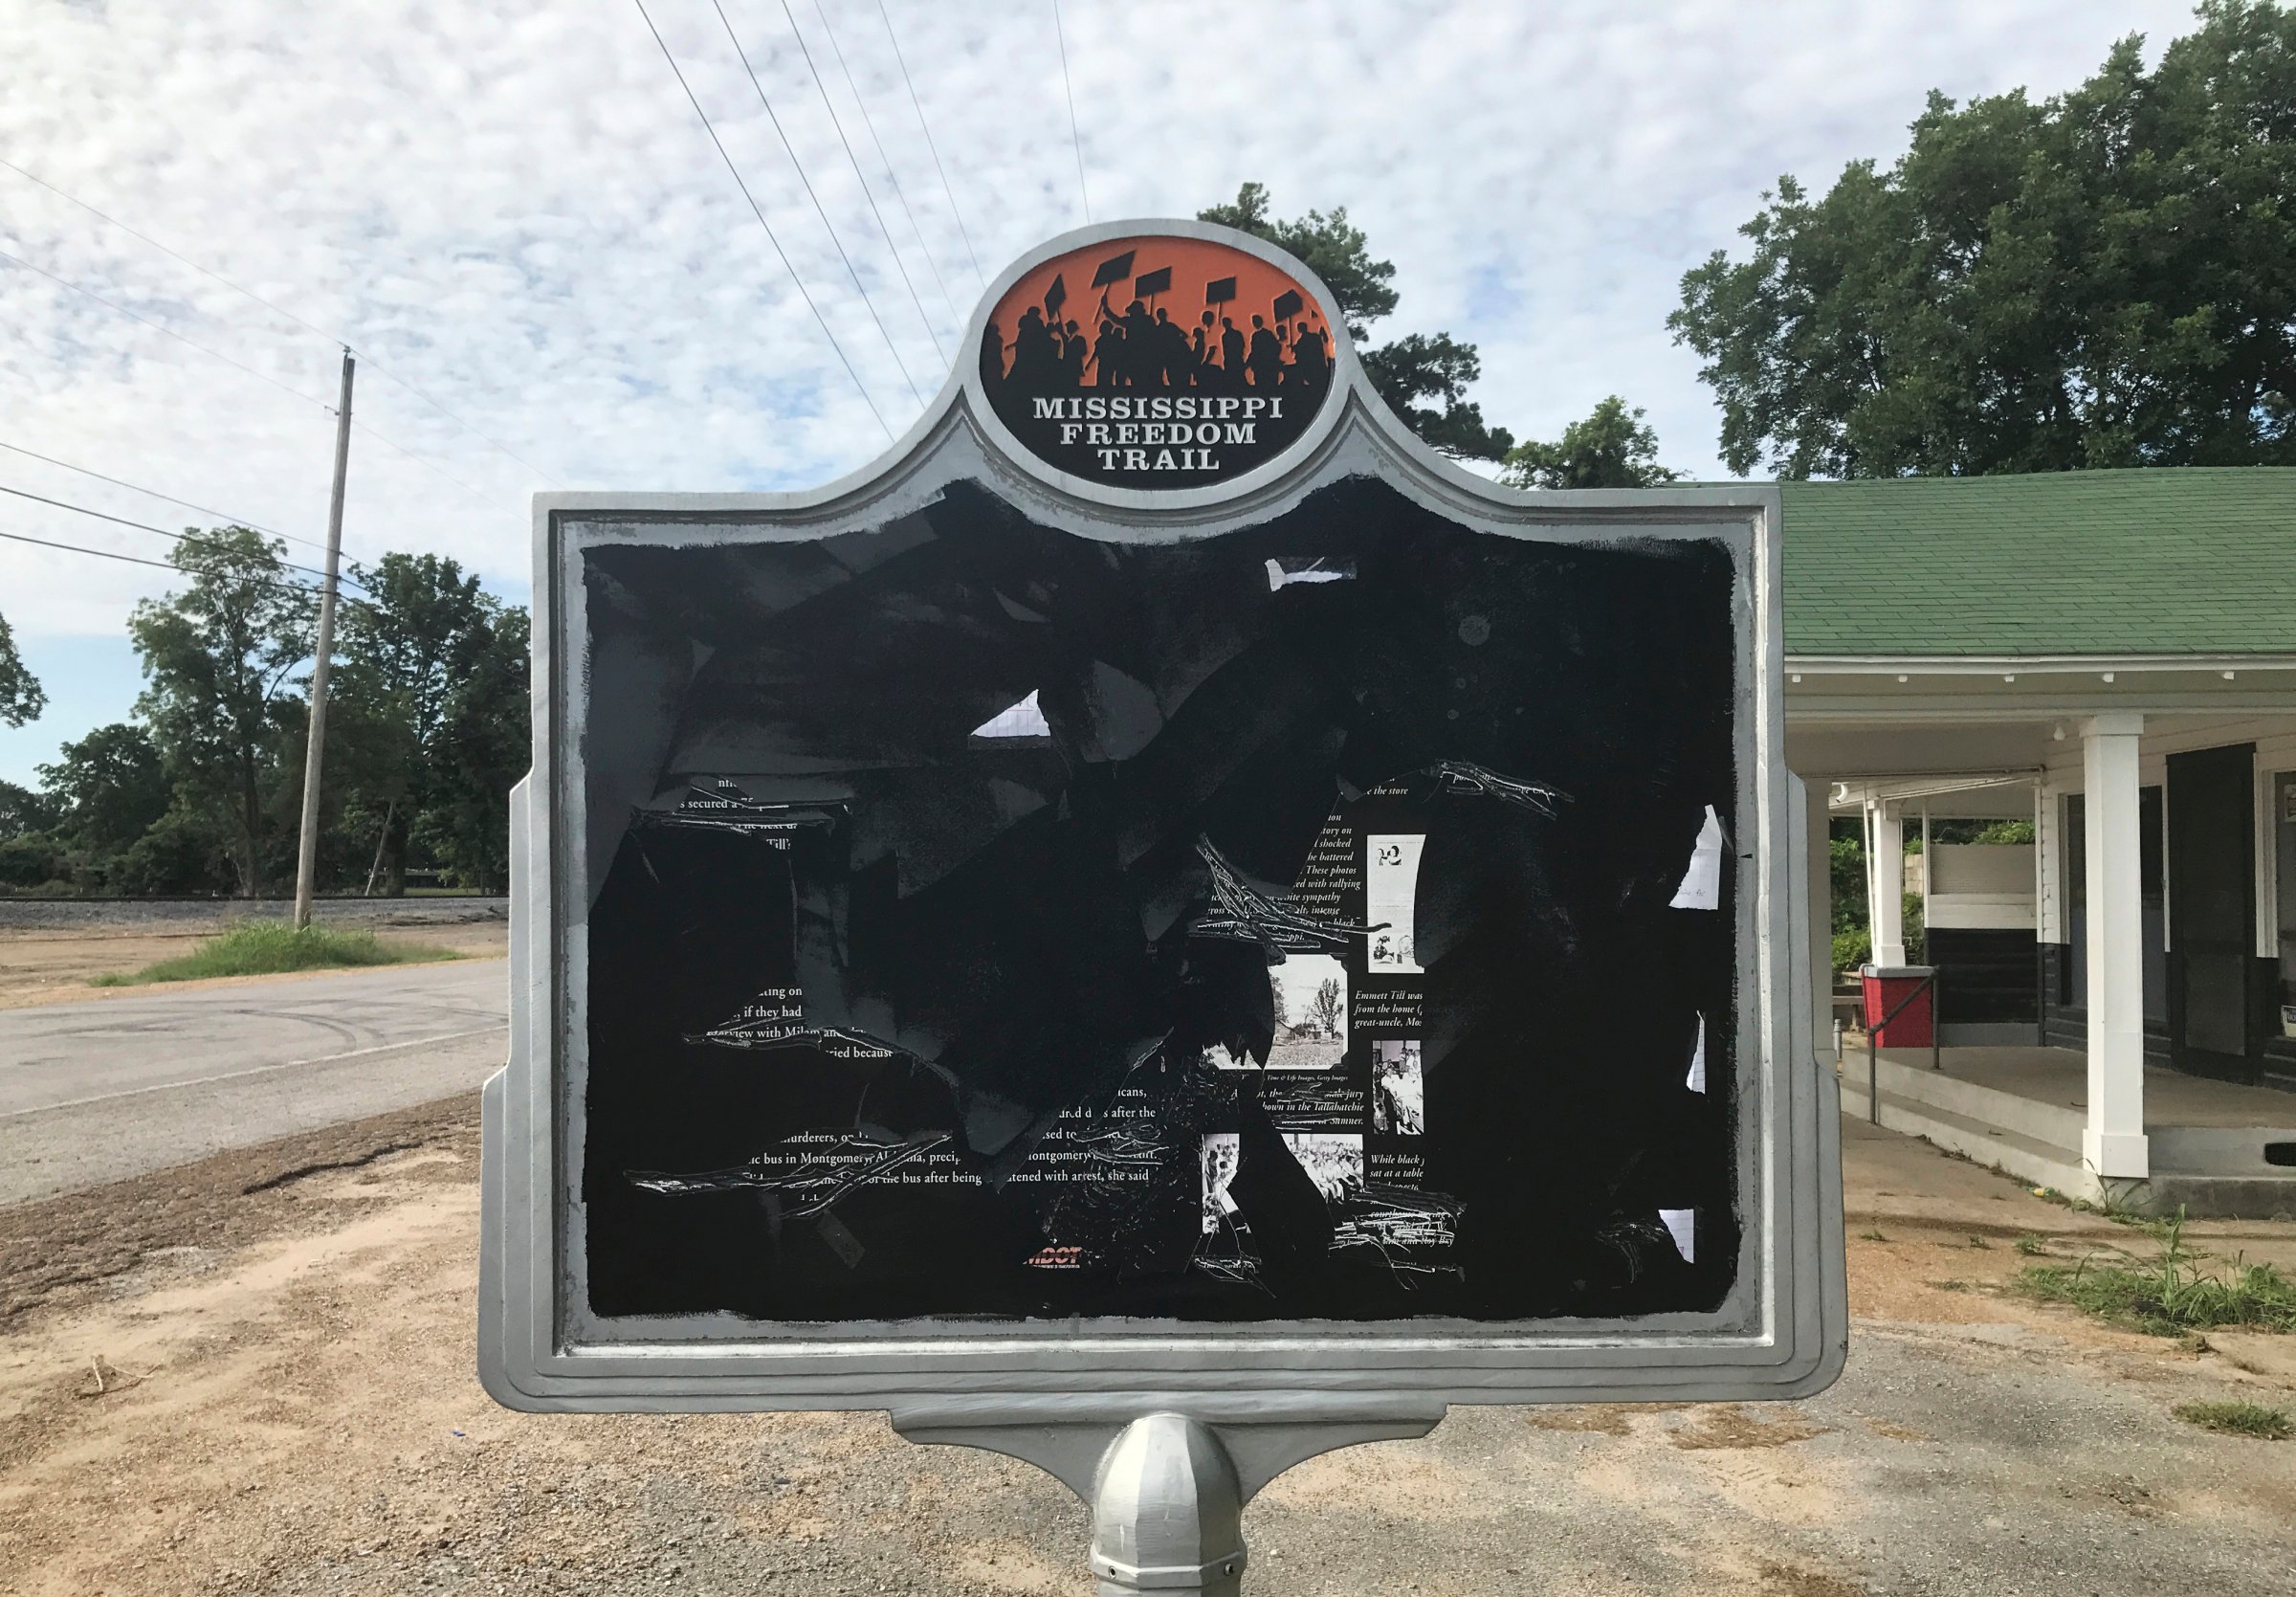 Civil Rights Sign Vandalized